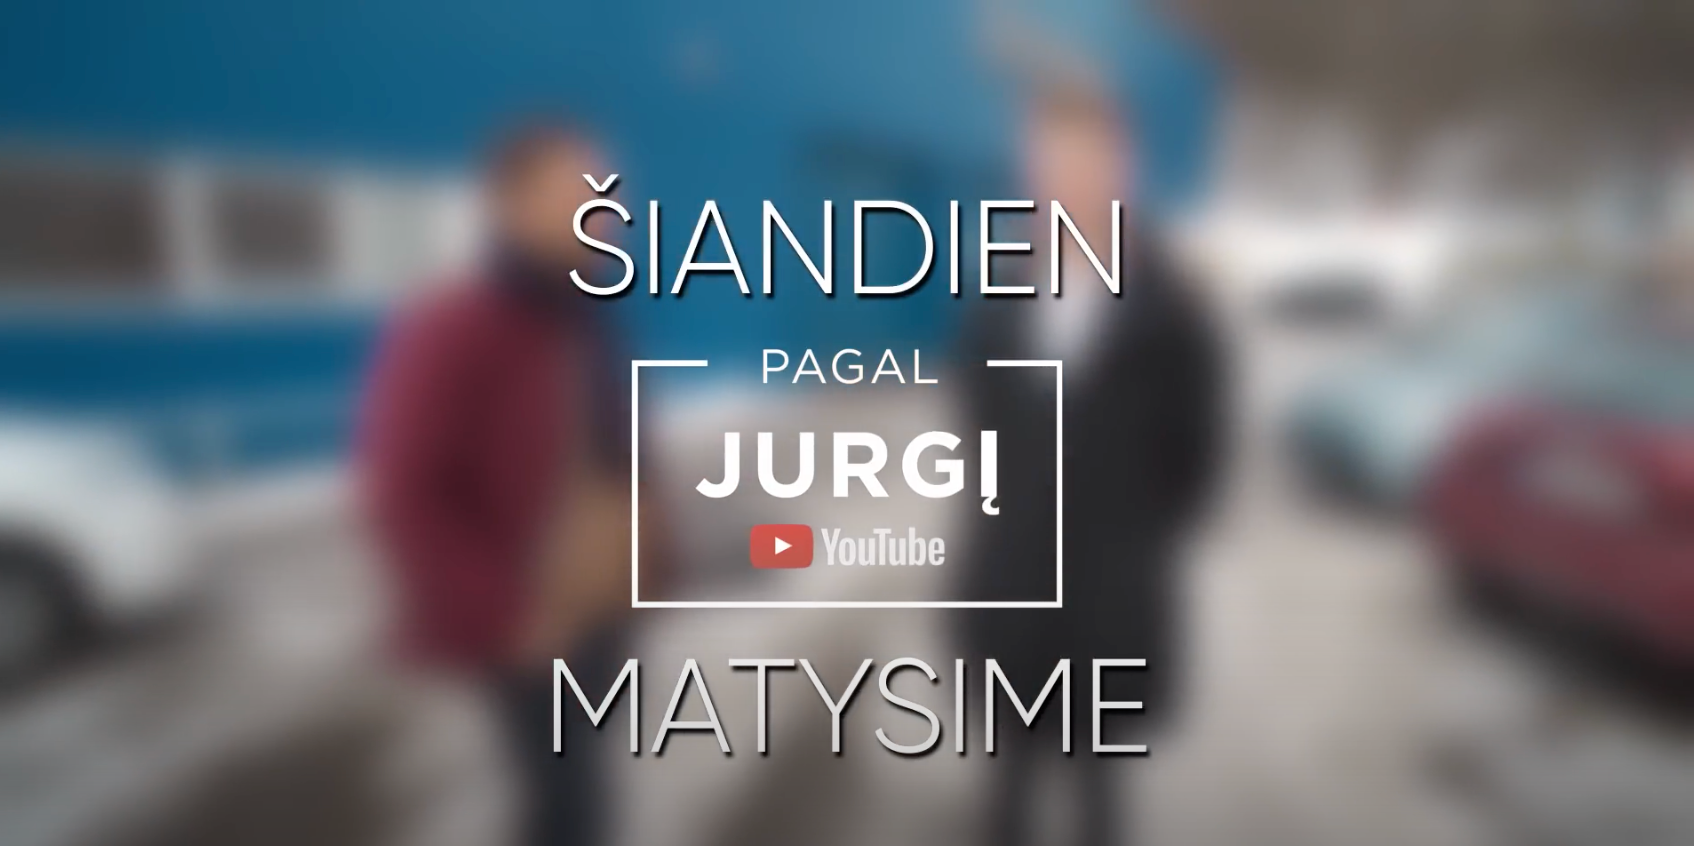 Let us introduce ourselves on the Youtube show "Pagal Jurgį"